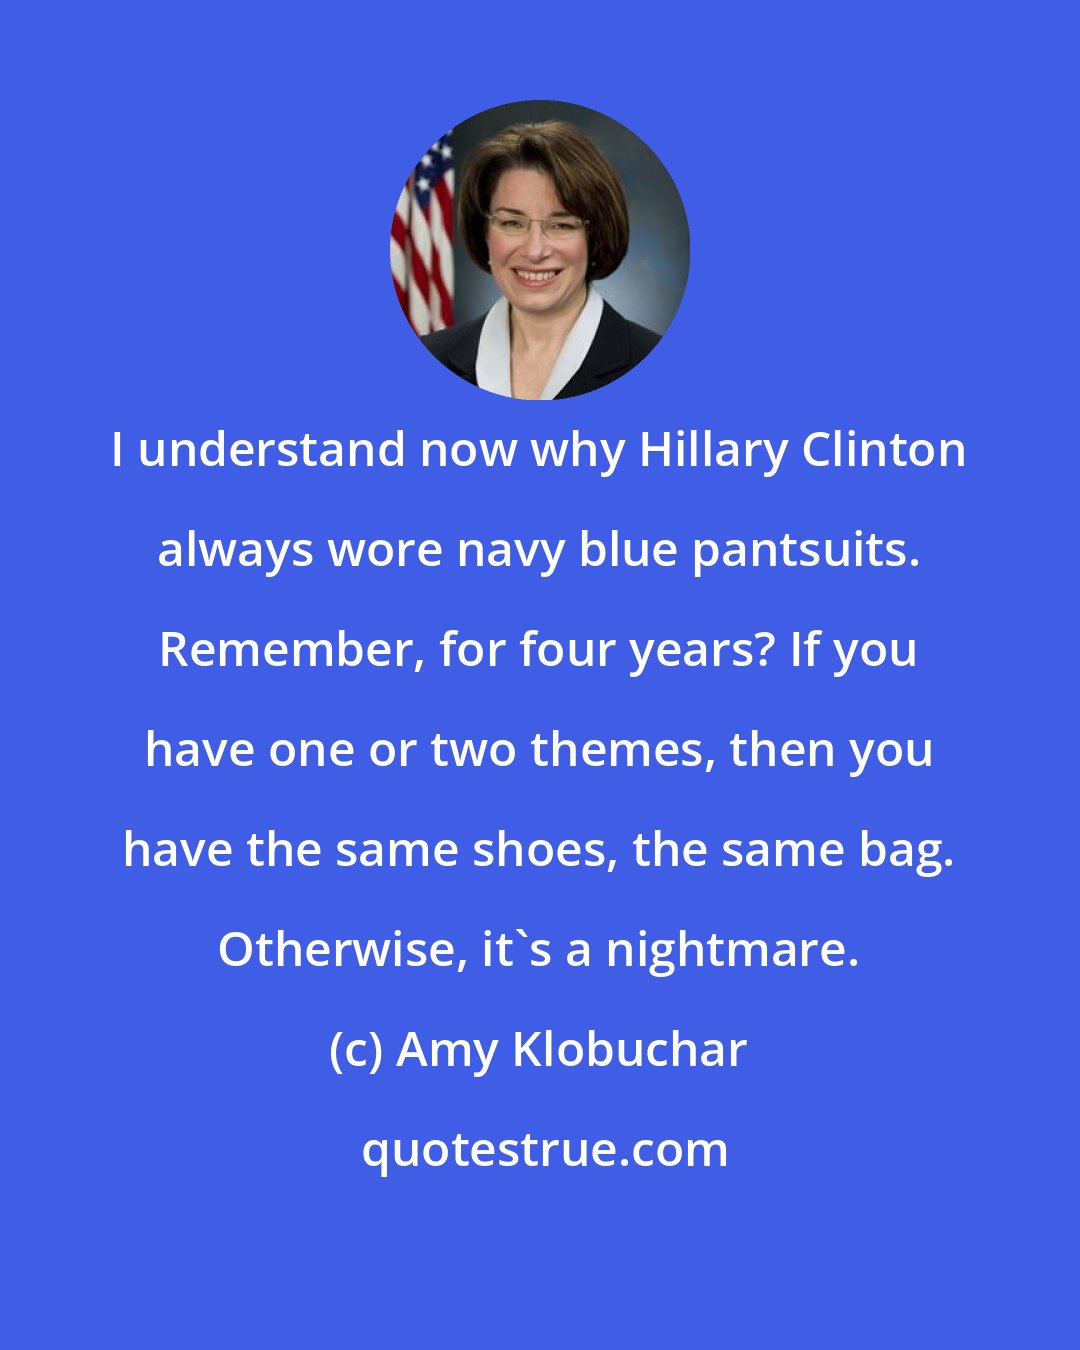 Amy Klobuchar: I understand now why Hillary Clinton always wore navy blue pantsuits. Remember, for four years? If you have one or two themes, then you have the same shoes, the same bag. Otherwise, it's a nightmare.